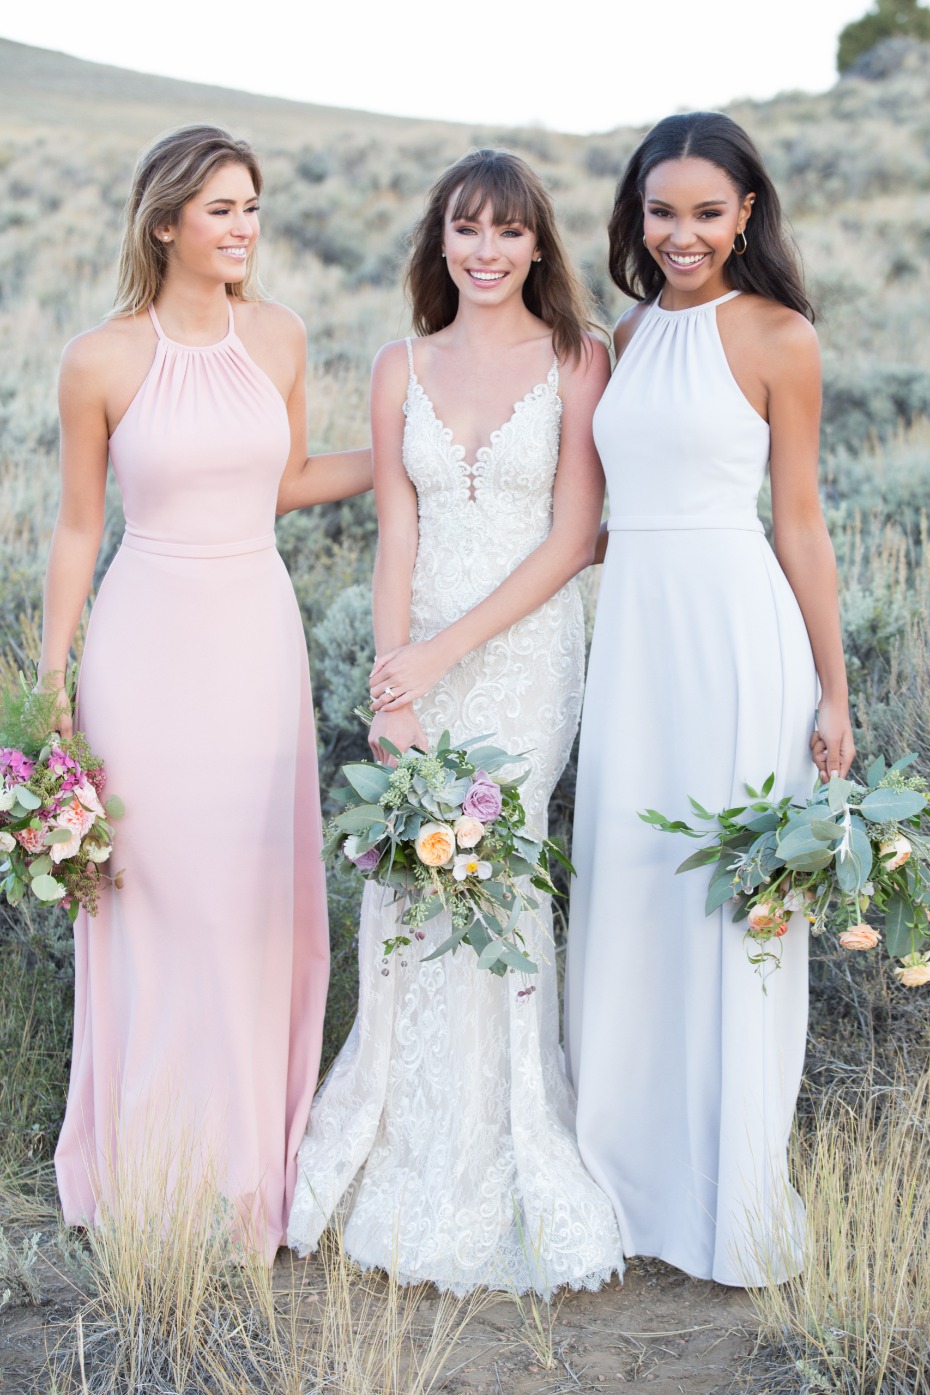 2018 Allure Bridals collection at Terry Costa